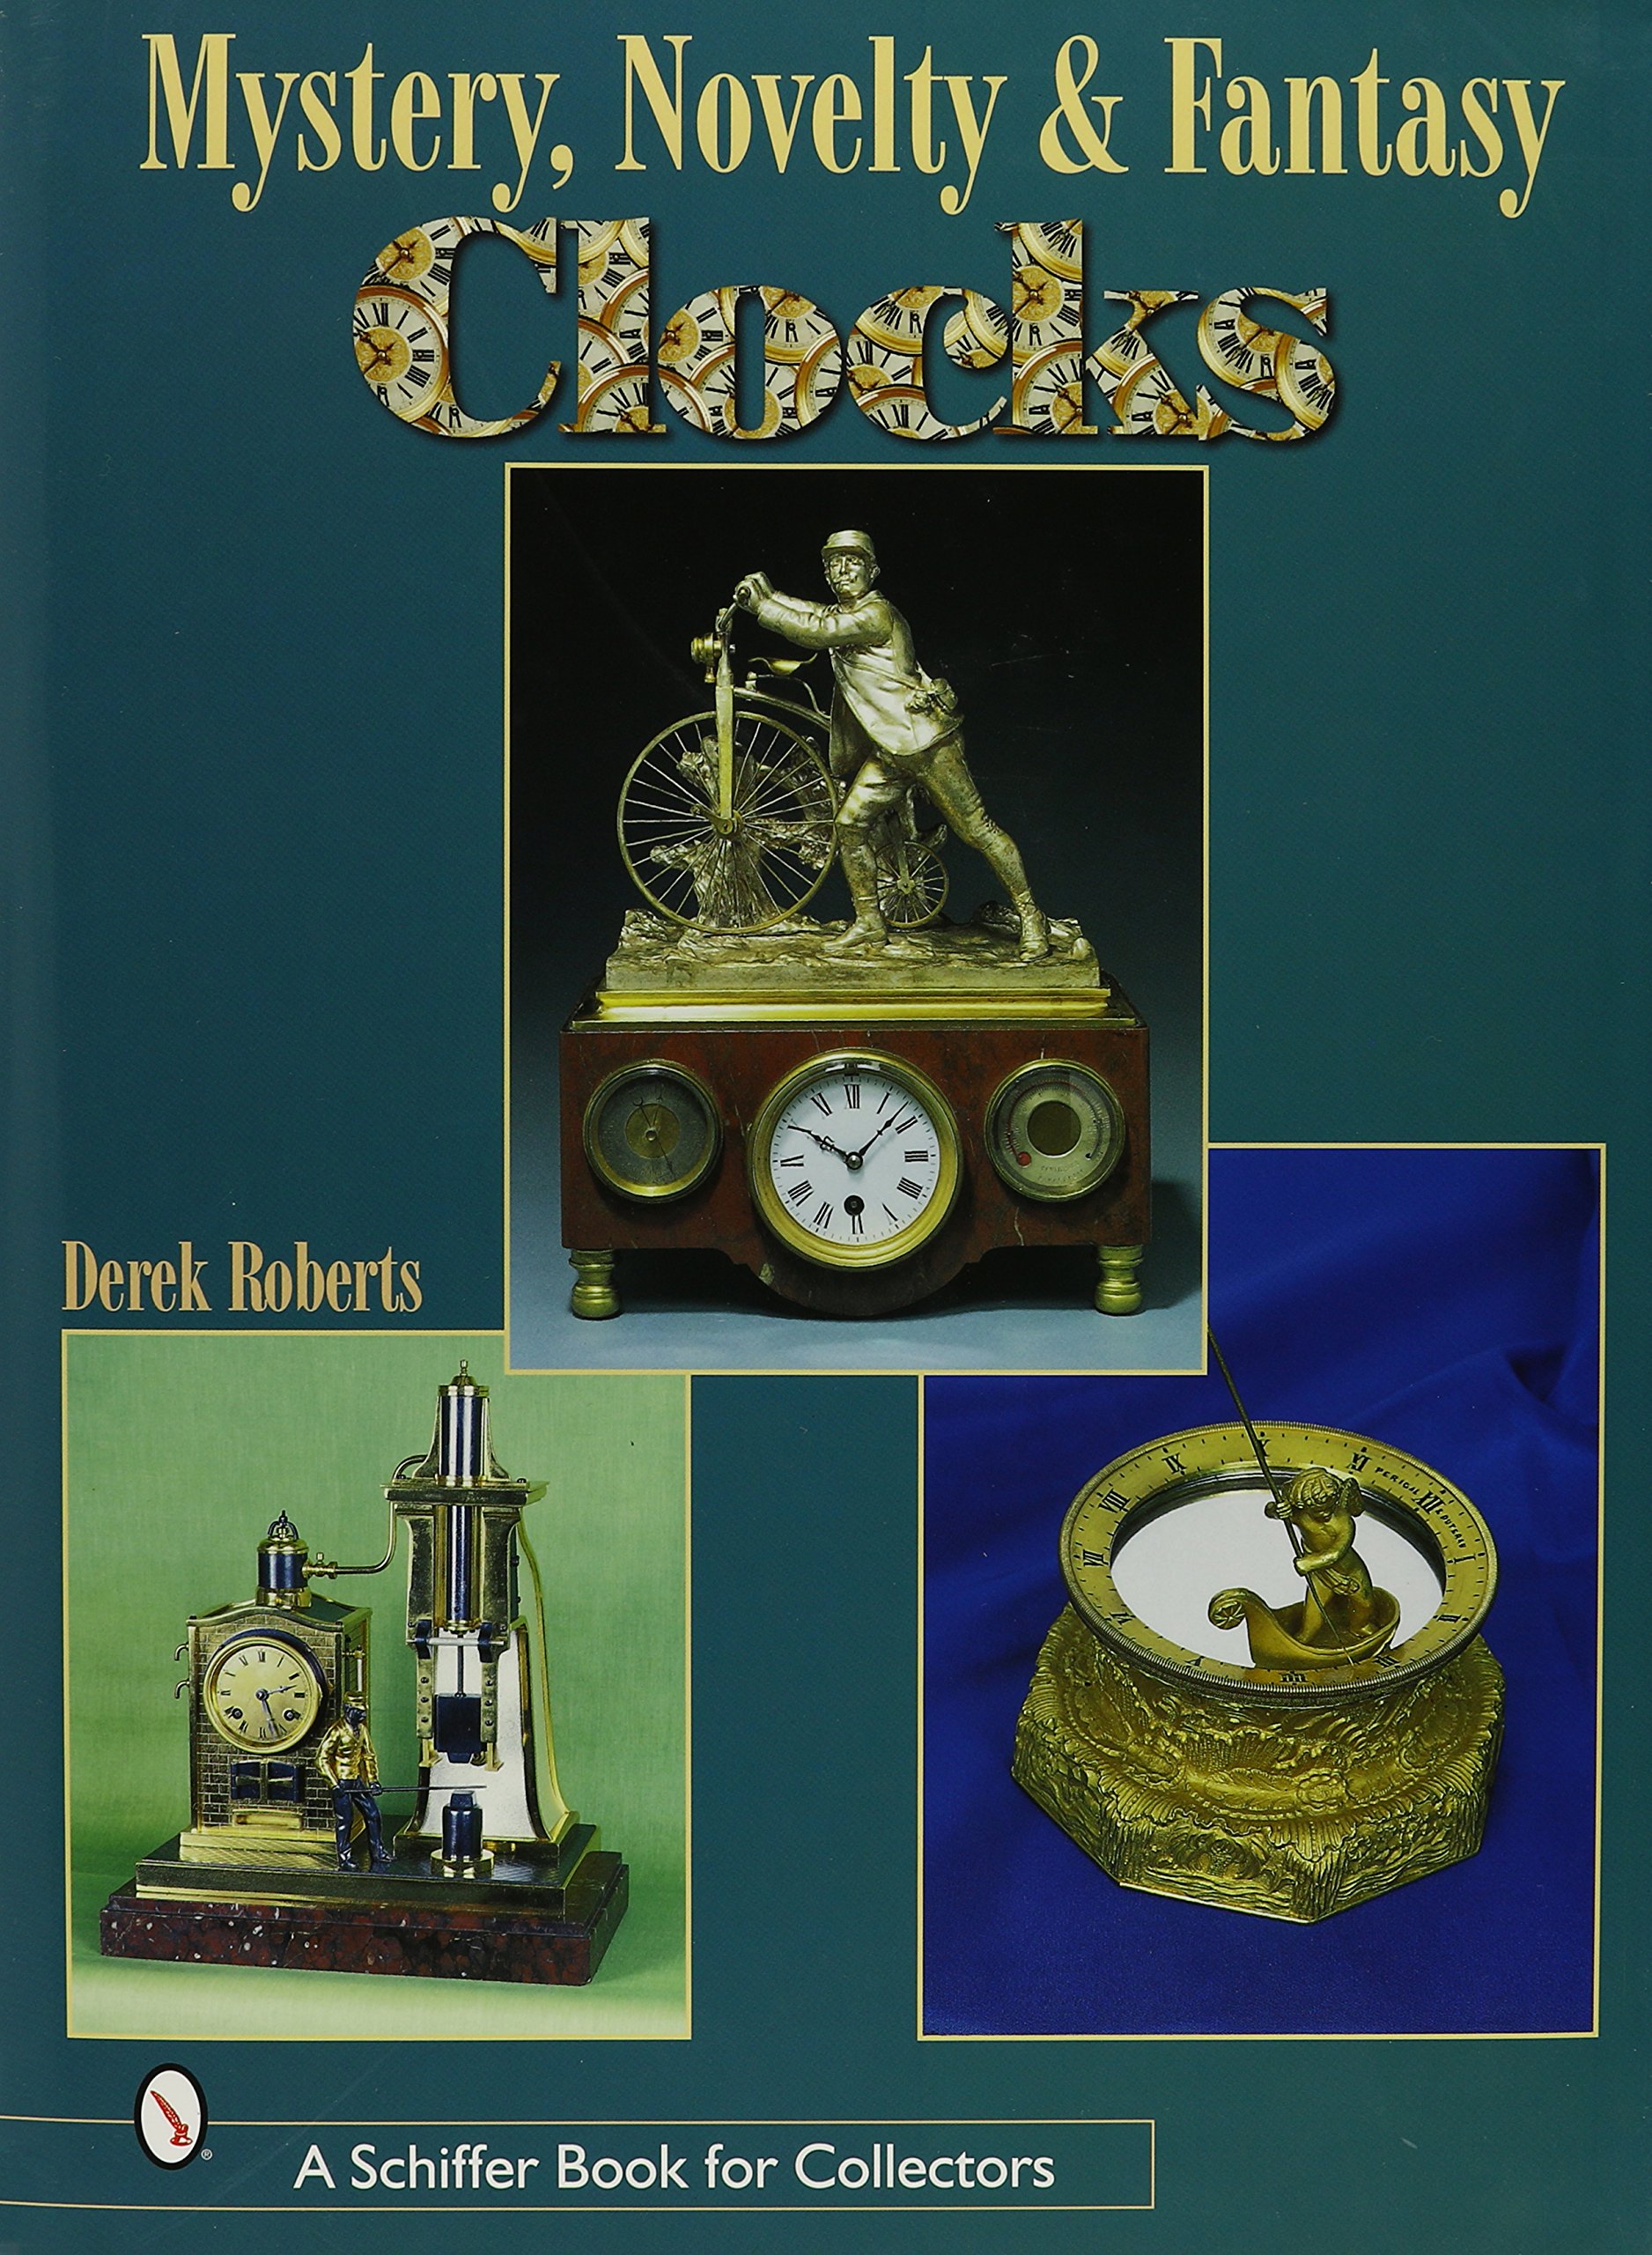 Mystery, Novelty, And Fantasy Clocks (Schiffer Book for Collectors)